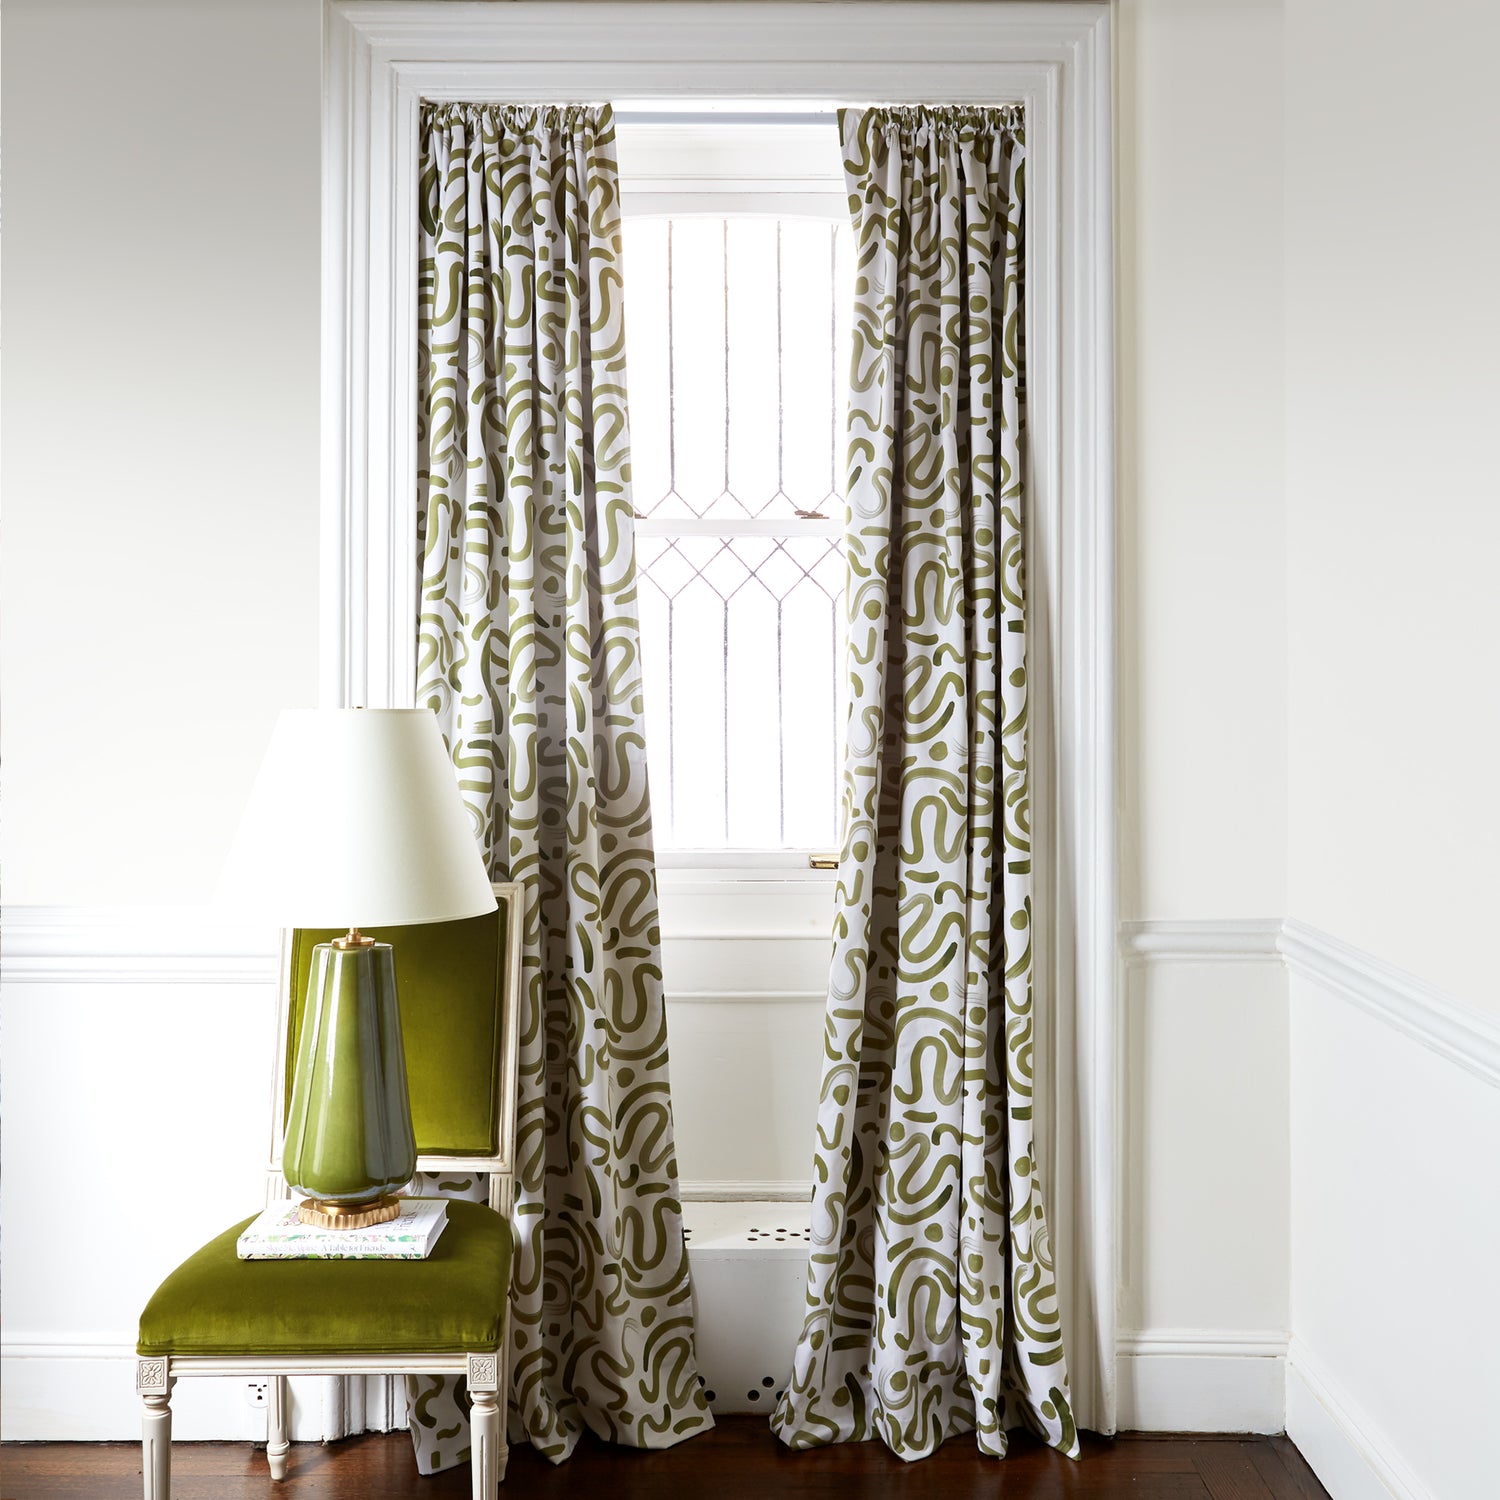 Moss Green Printed Curtains on white rod in front of an illuminated window with Green Velvet chair with white and green lamp on top of white book